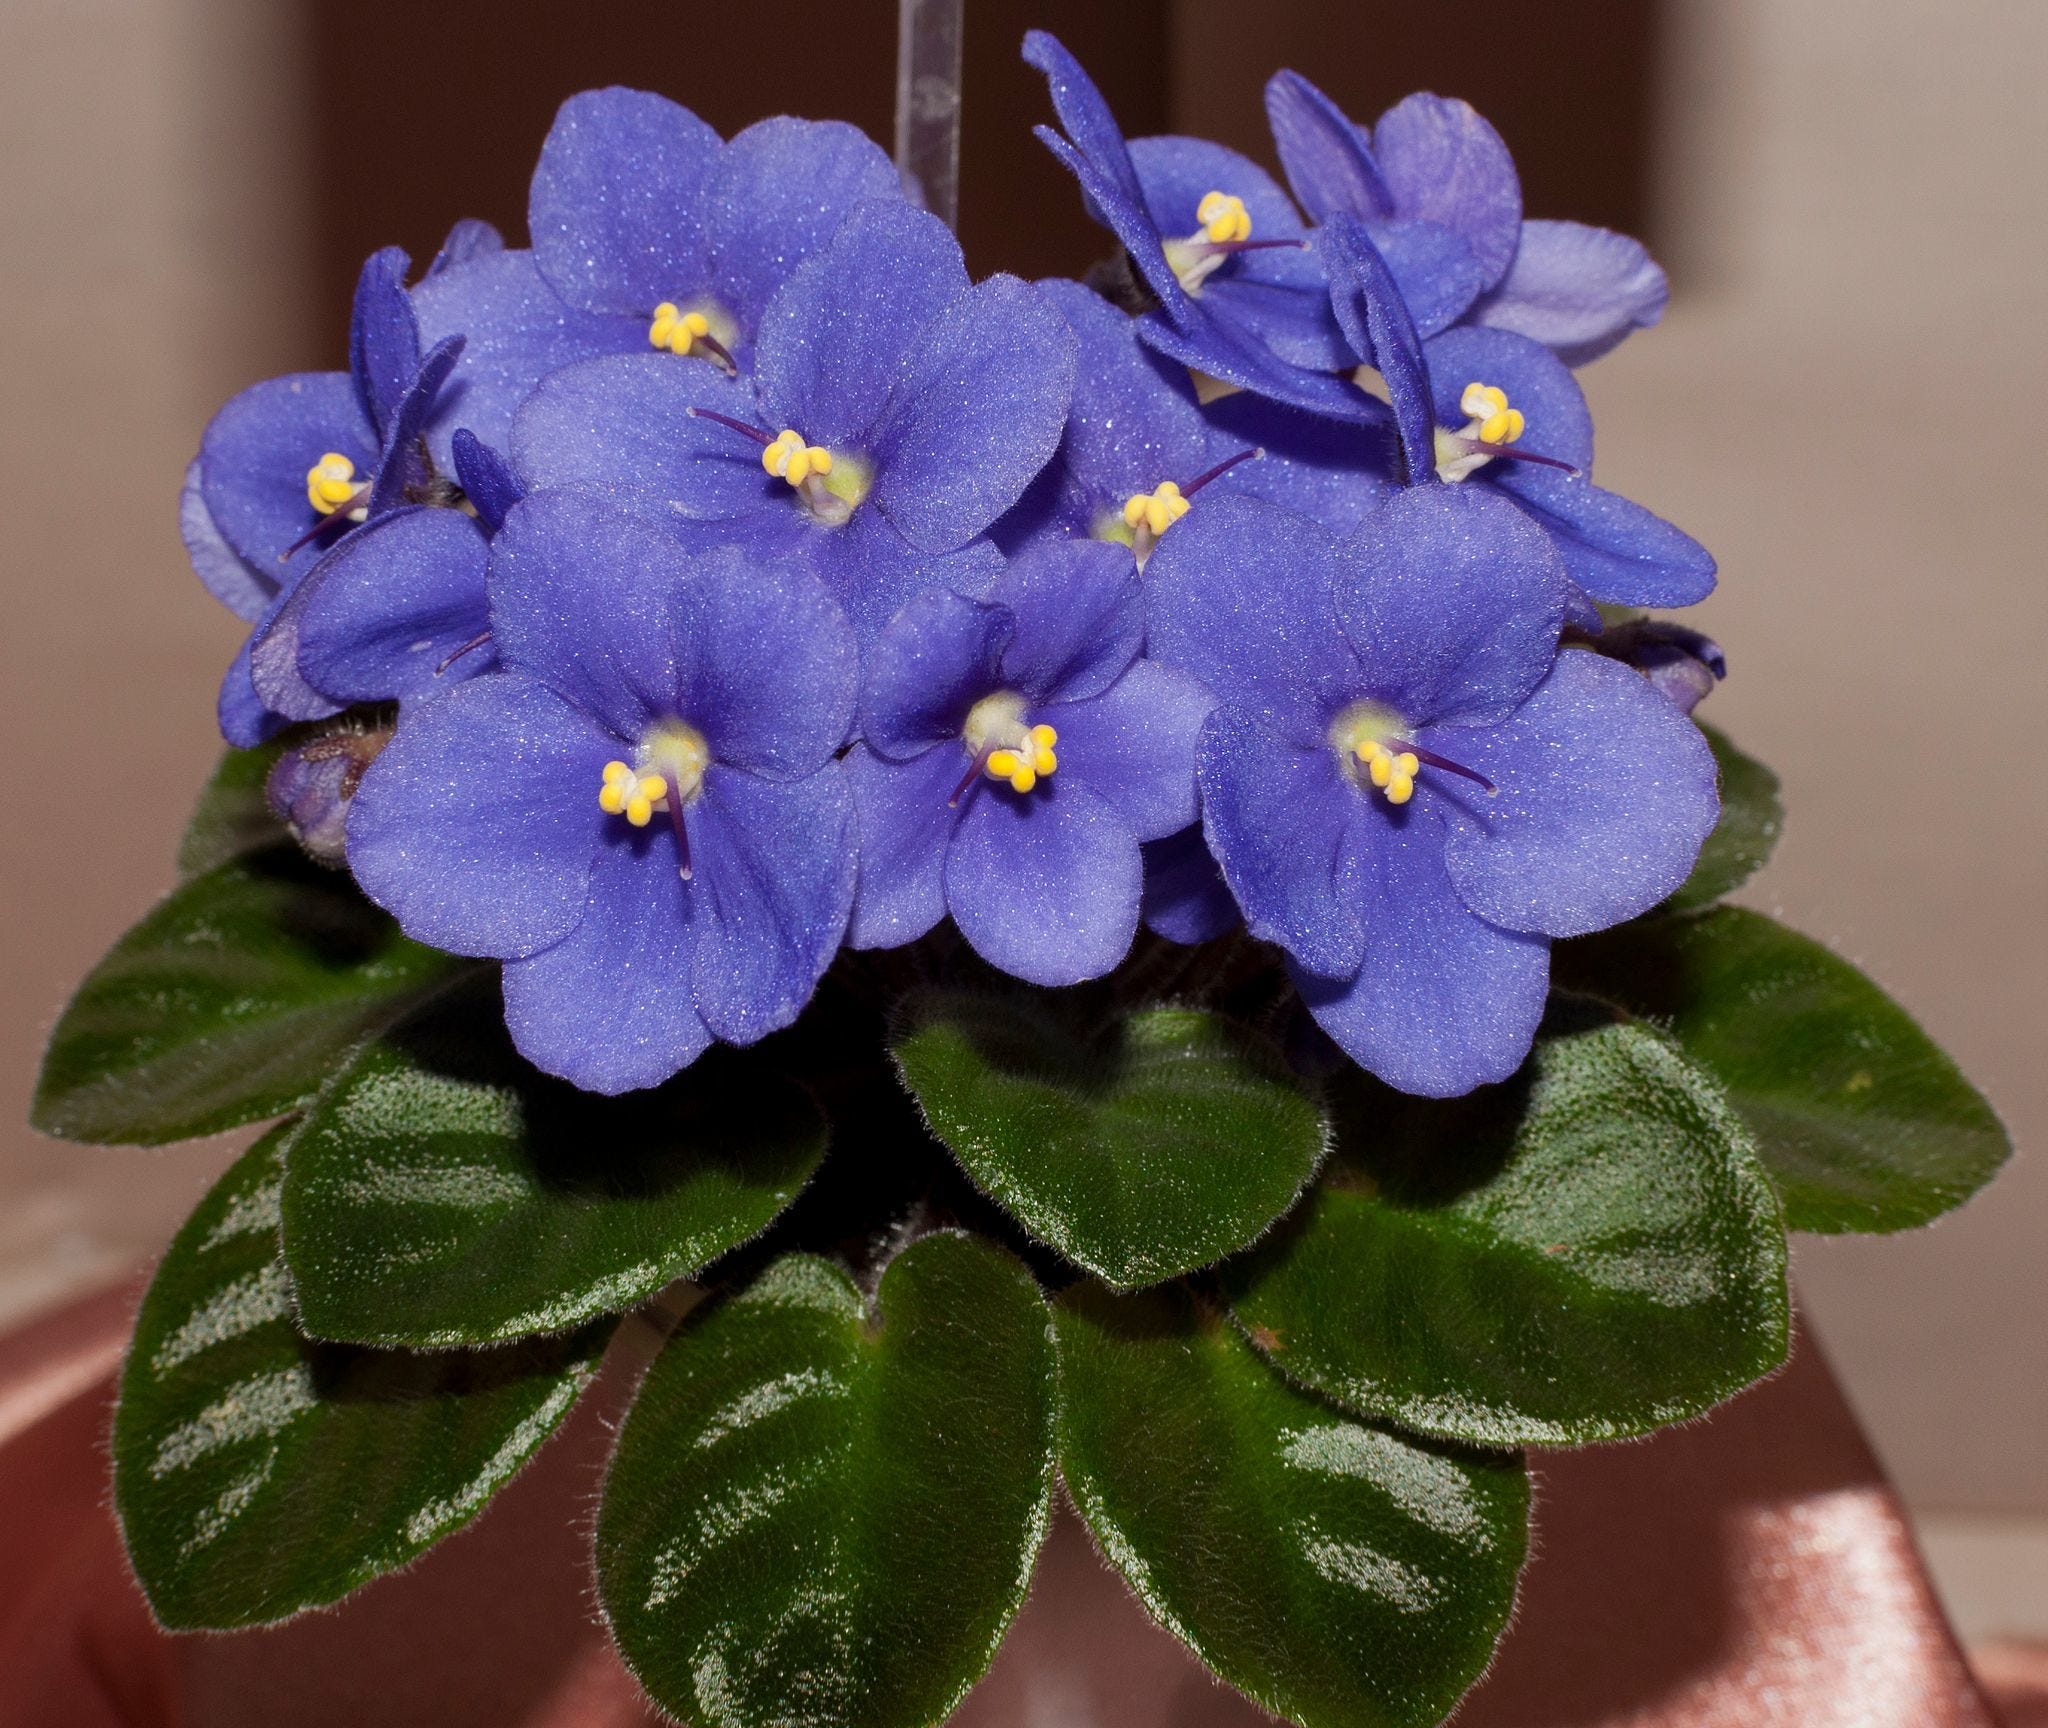 These tips will keep your African violets happy, healthy and blooming